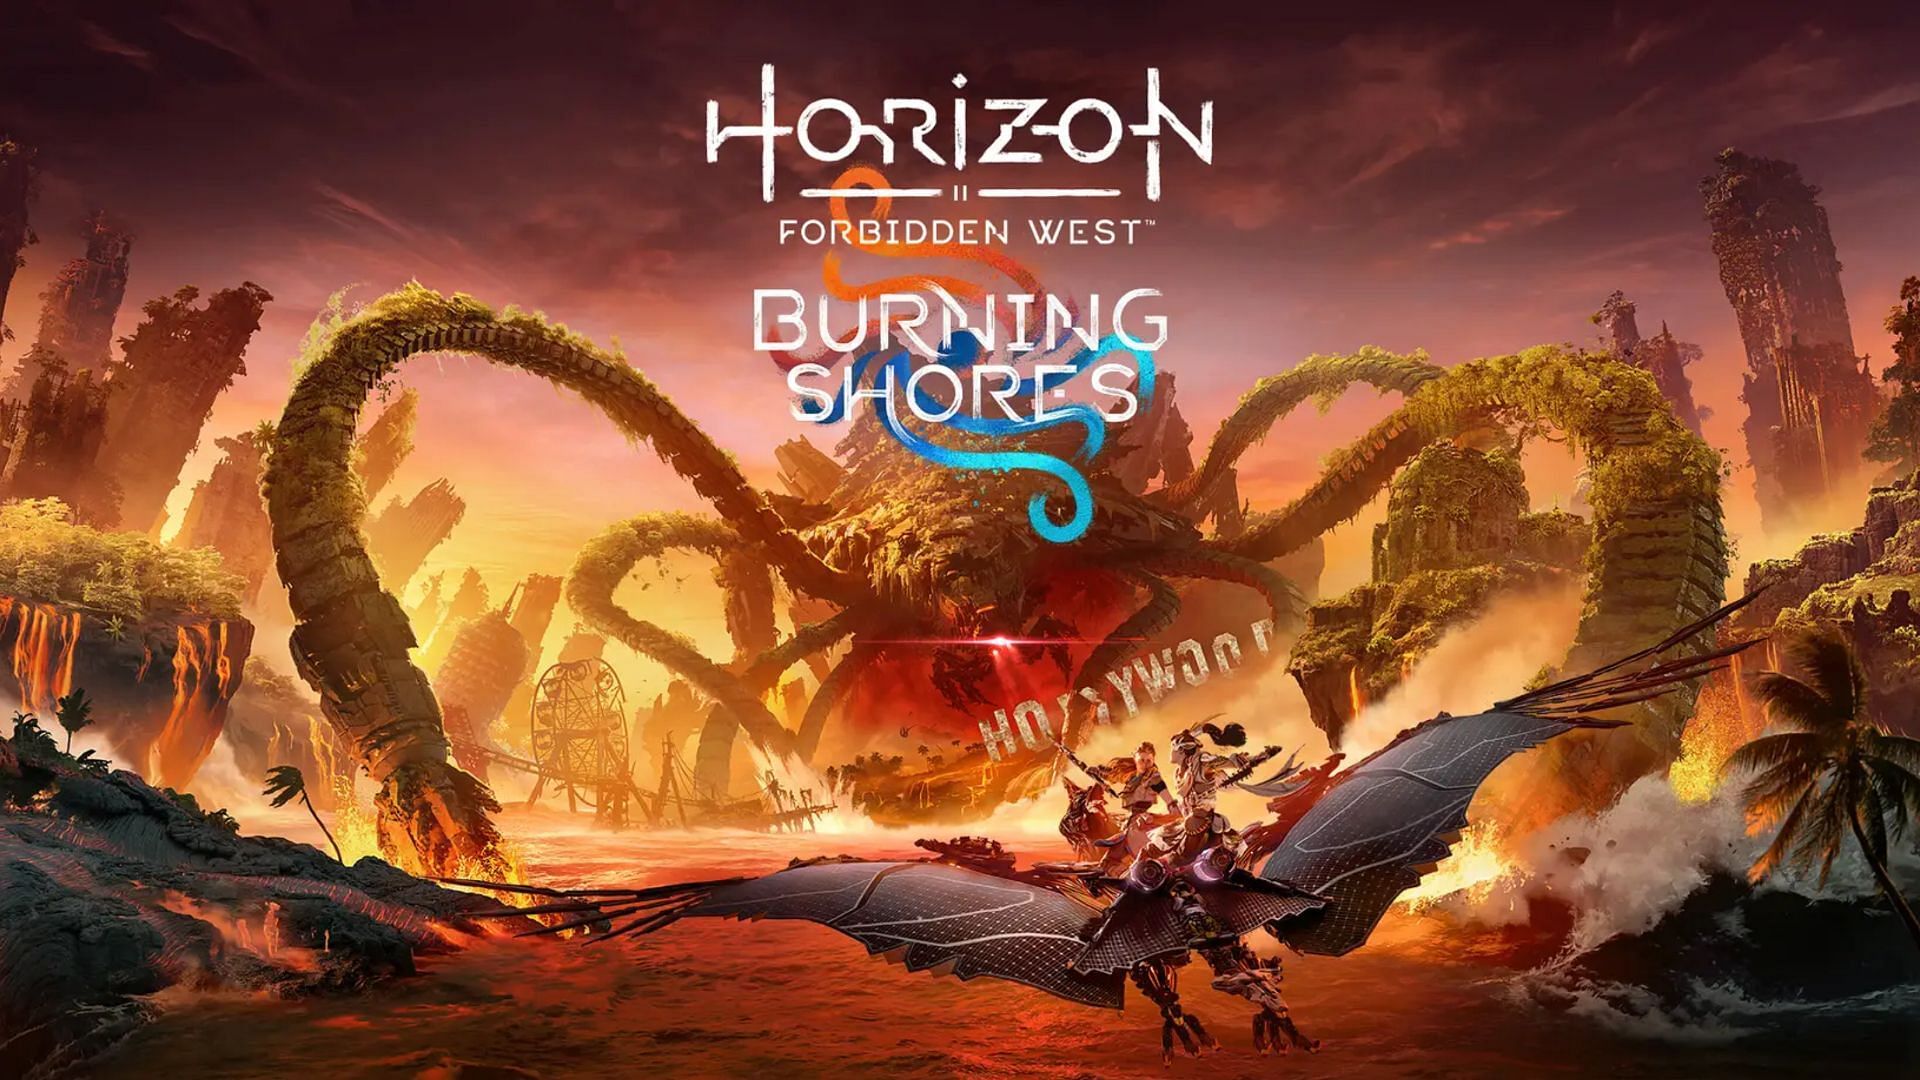 Horizon Forbidden West: Burning Shores finally gets an official release date (Image via PlayStation)